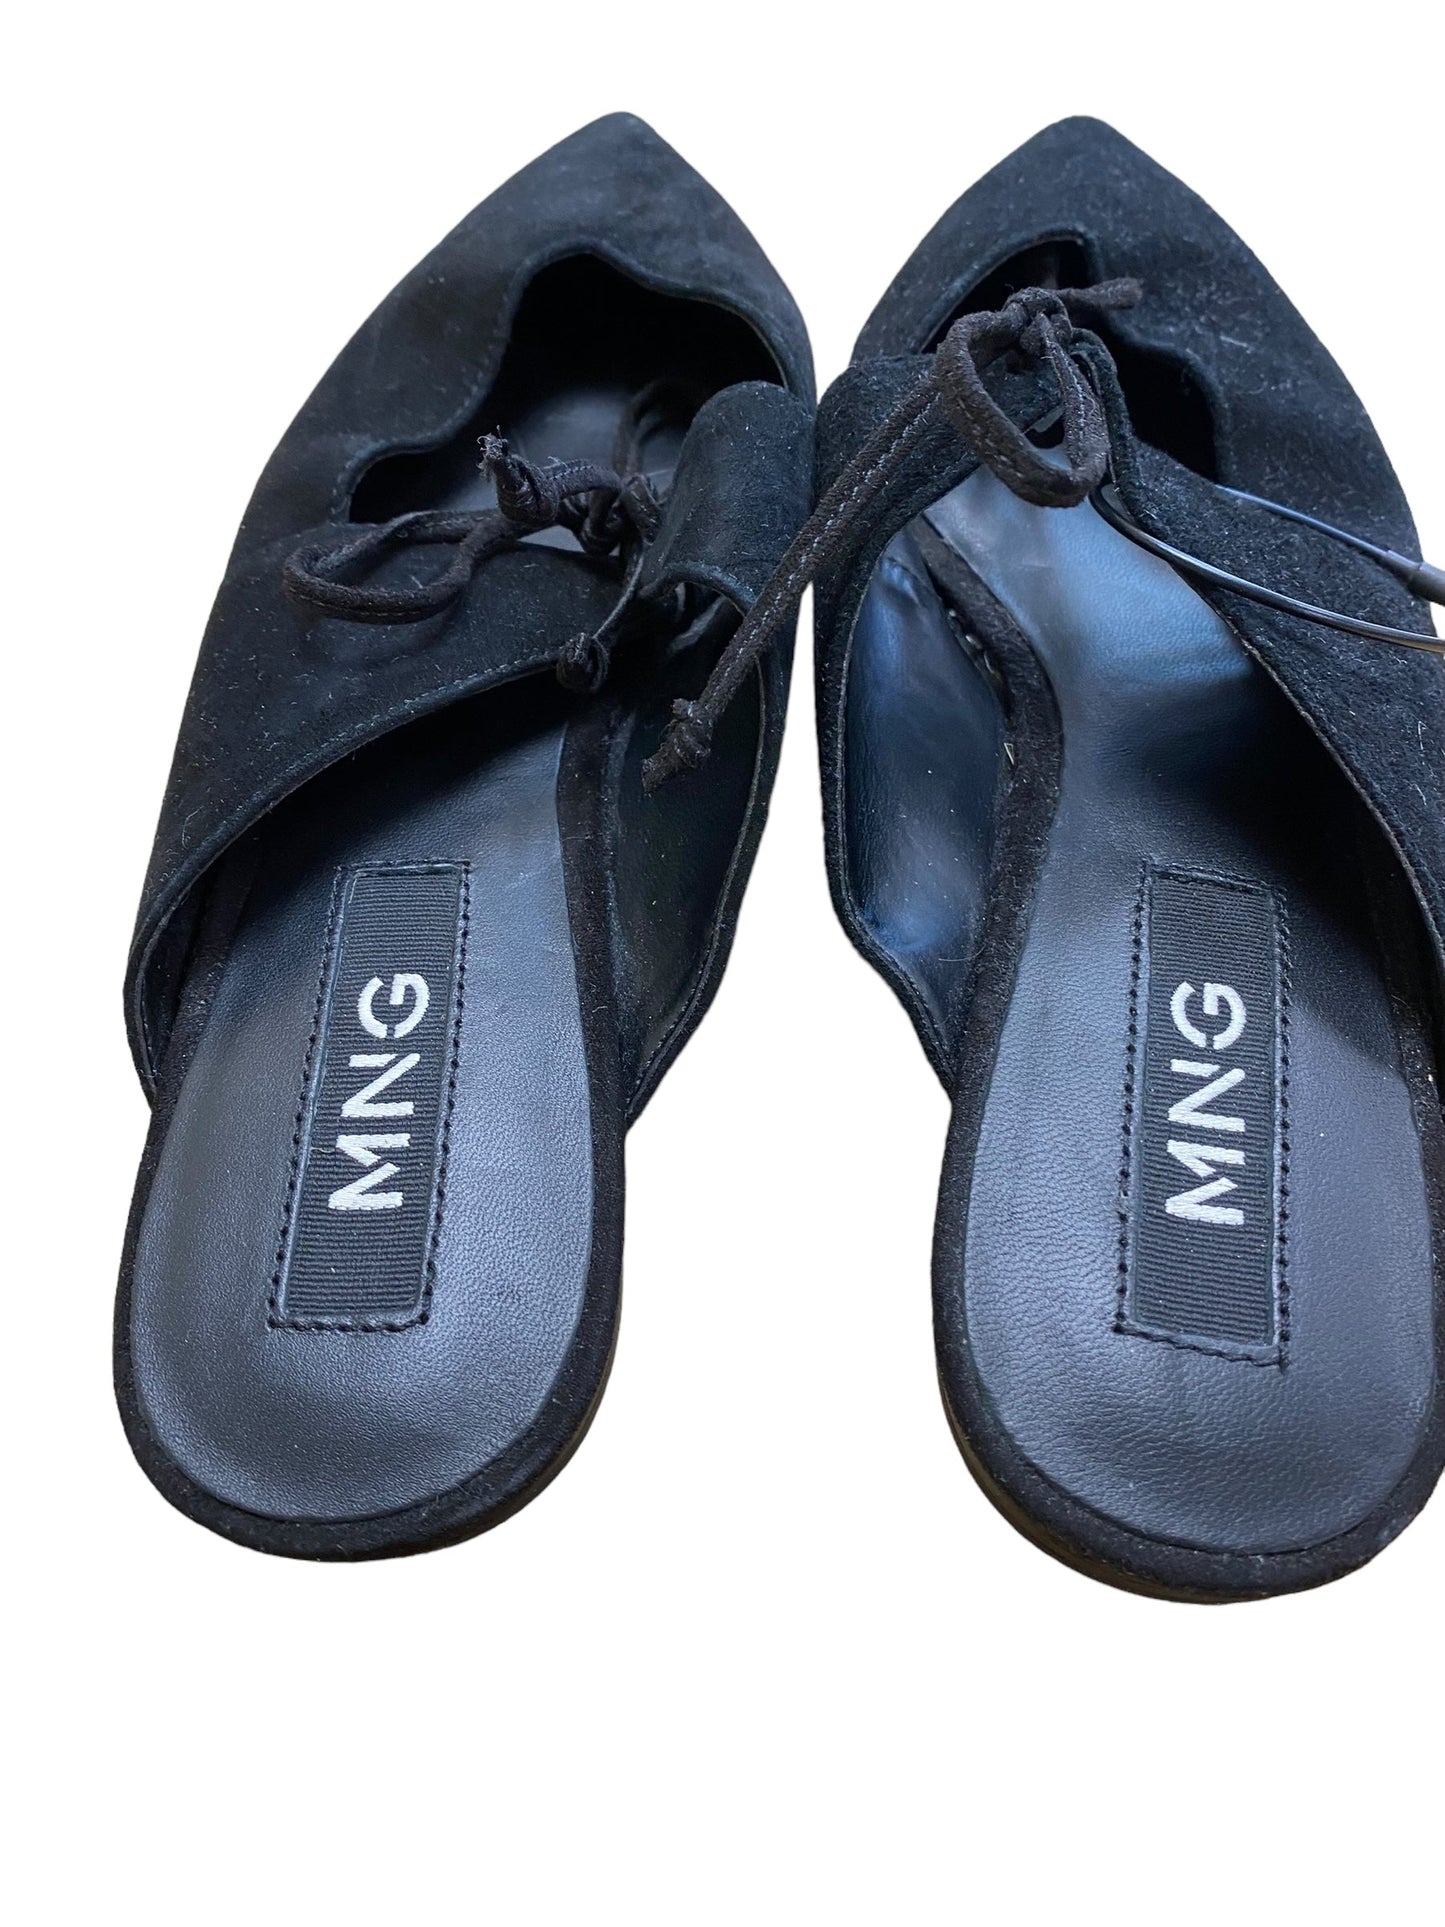 Shoes Flats By Mng  Size: 7.5